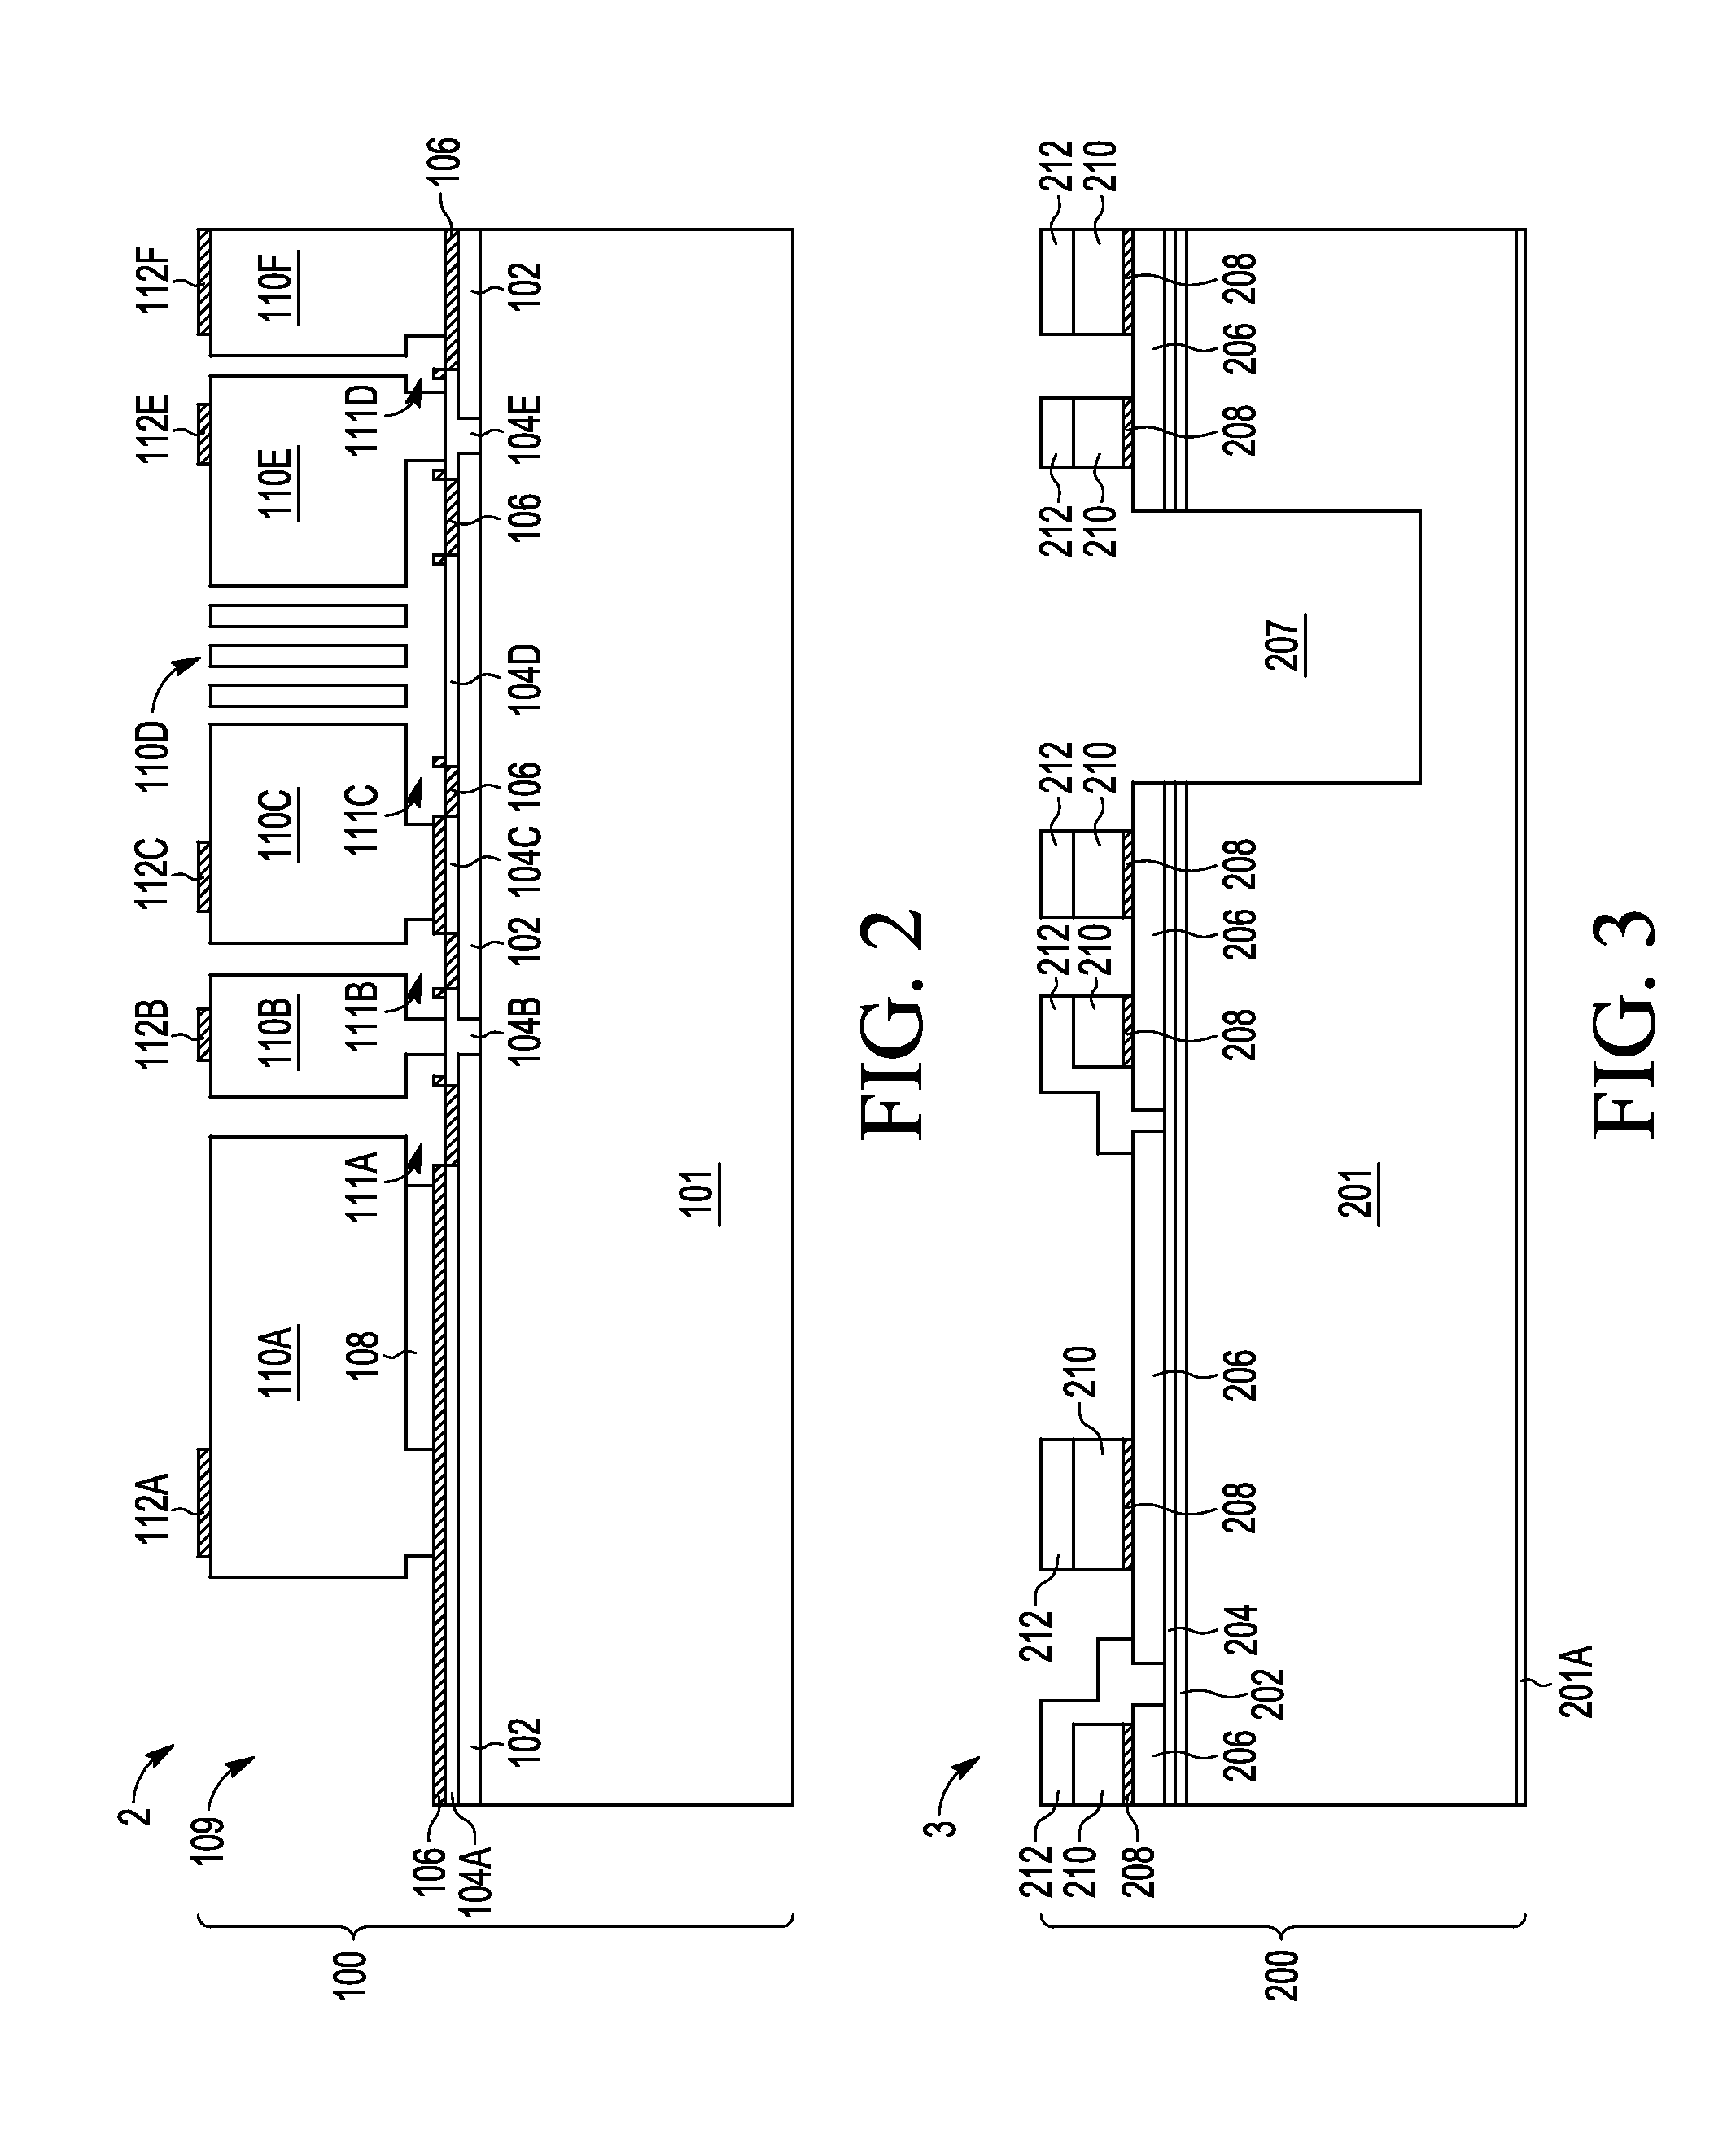 MEMS Fabrication Process with Two Cavities Operating at Different Pressures